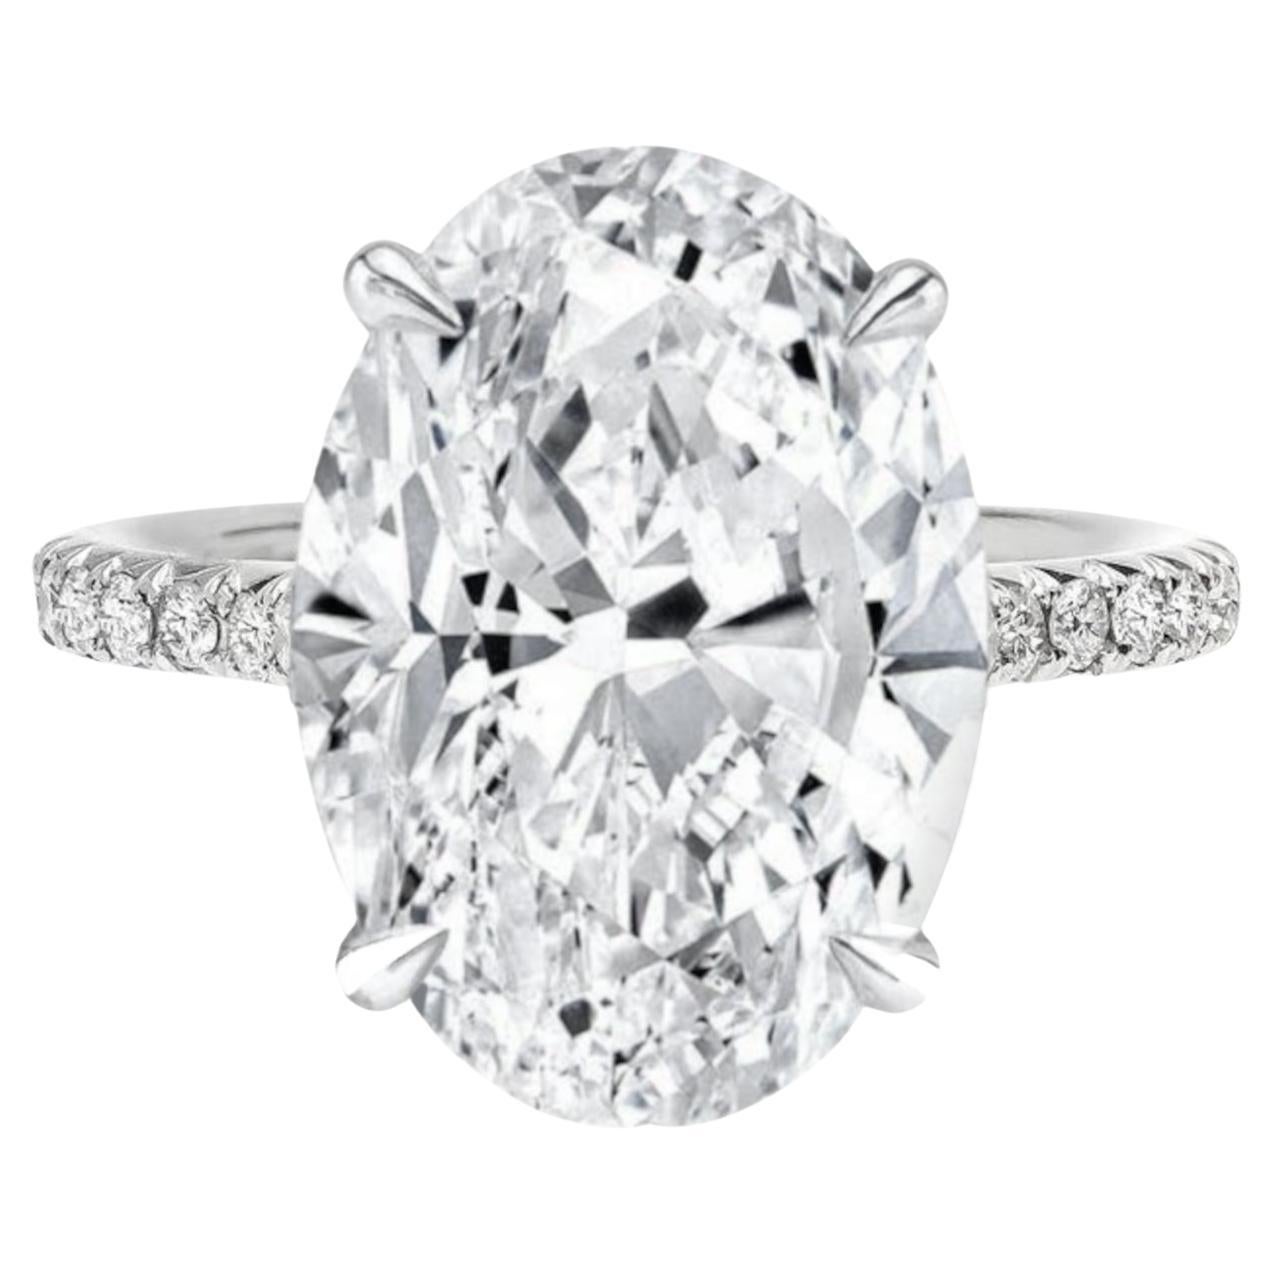 Exceptional GIA Certified 5.01 Carat Oval Diamond with Pavé Ring 